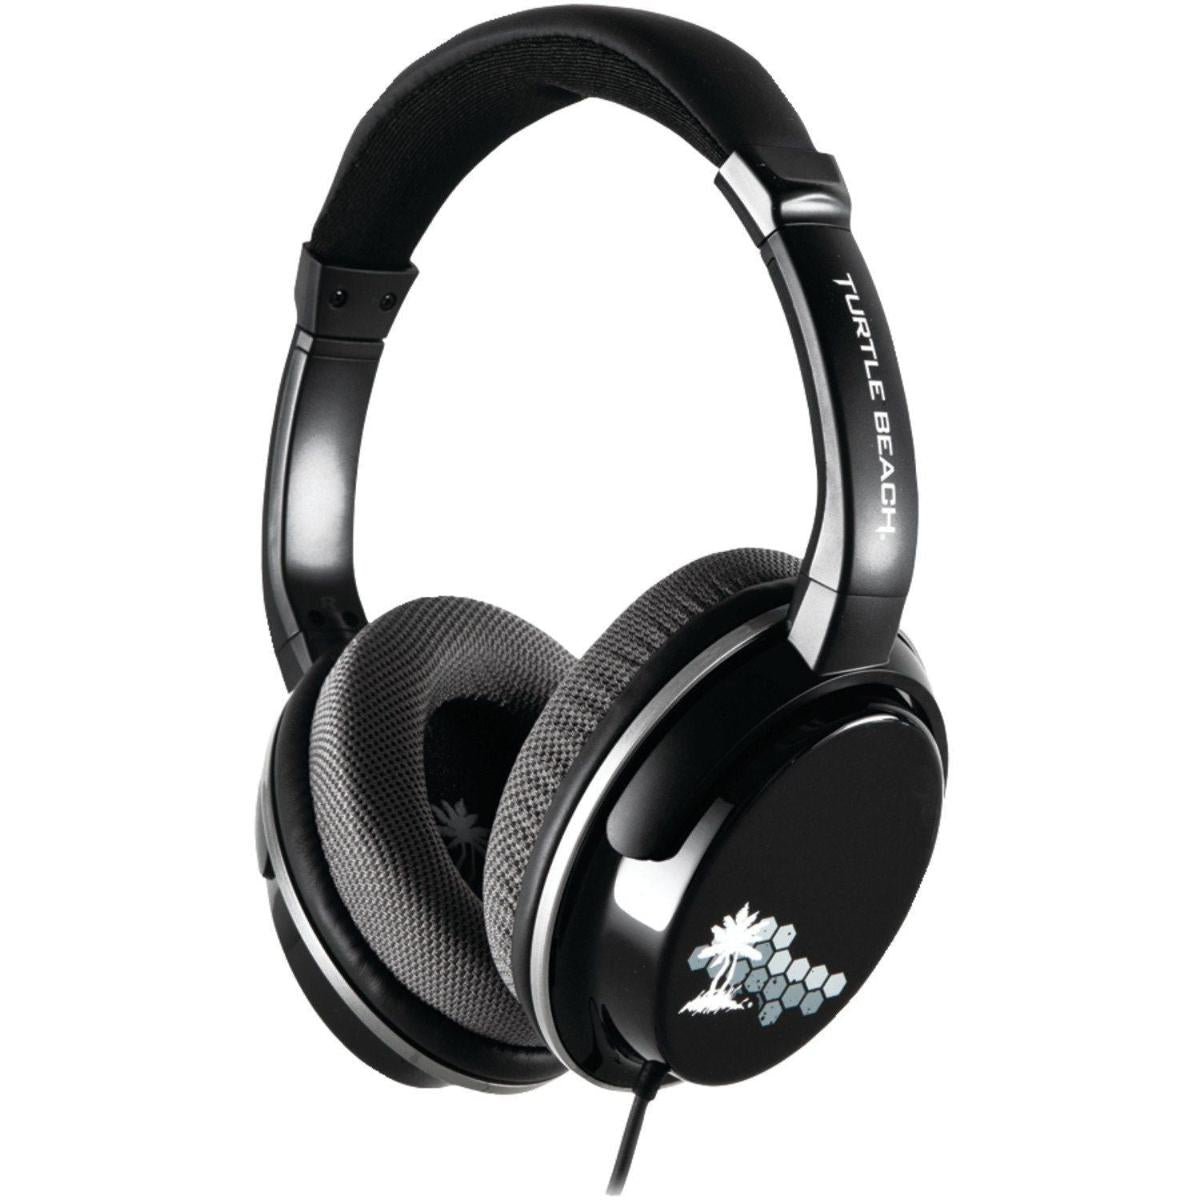 M5TI/TURTLE BEACH Mobile Gaming Headset and iPad Tablet CaseExclusively on Sunday Electronics HEADPHONE / Black / Wired